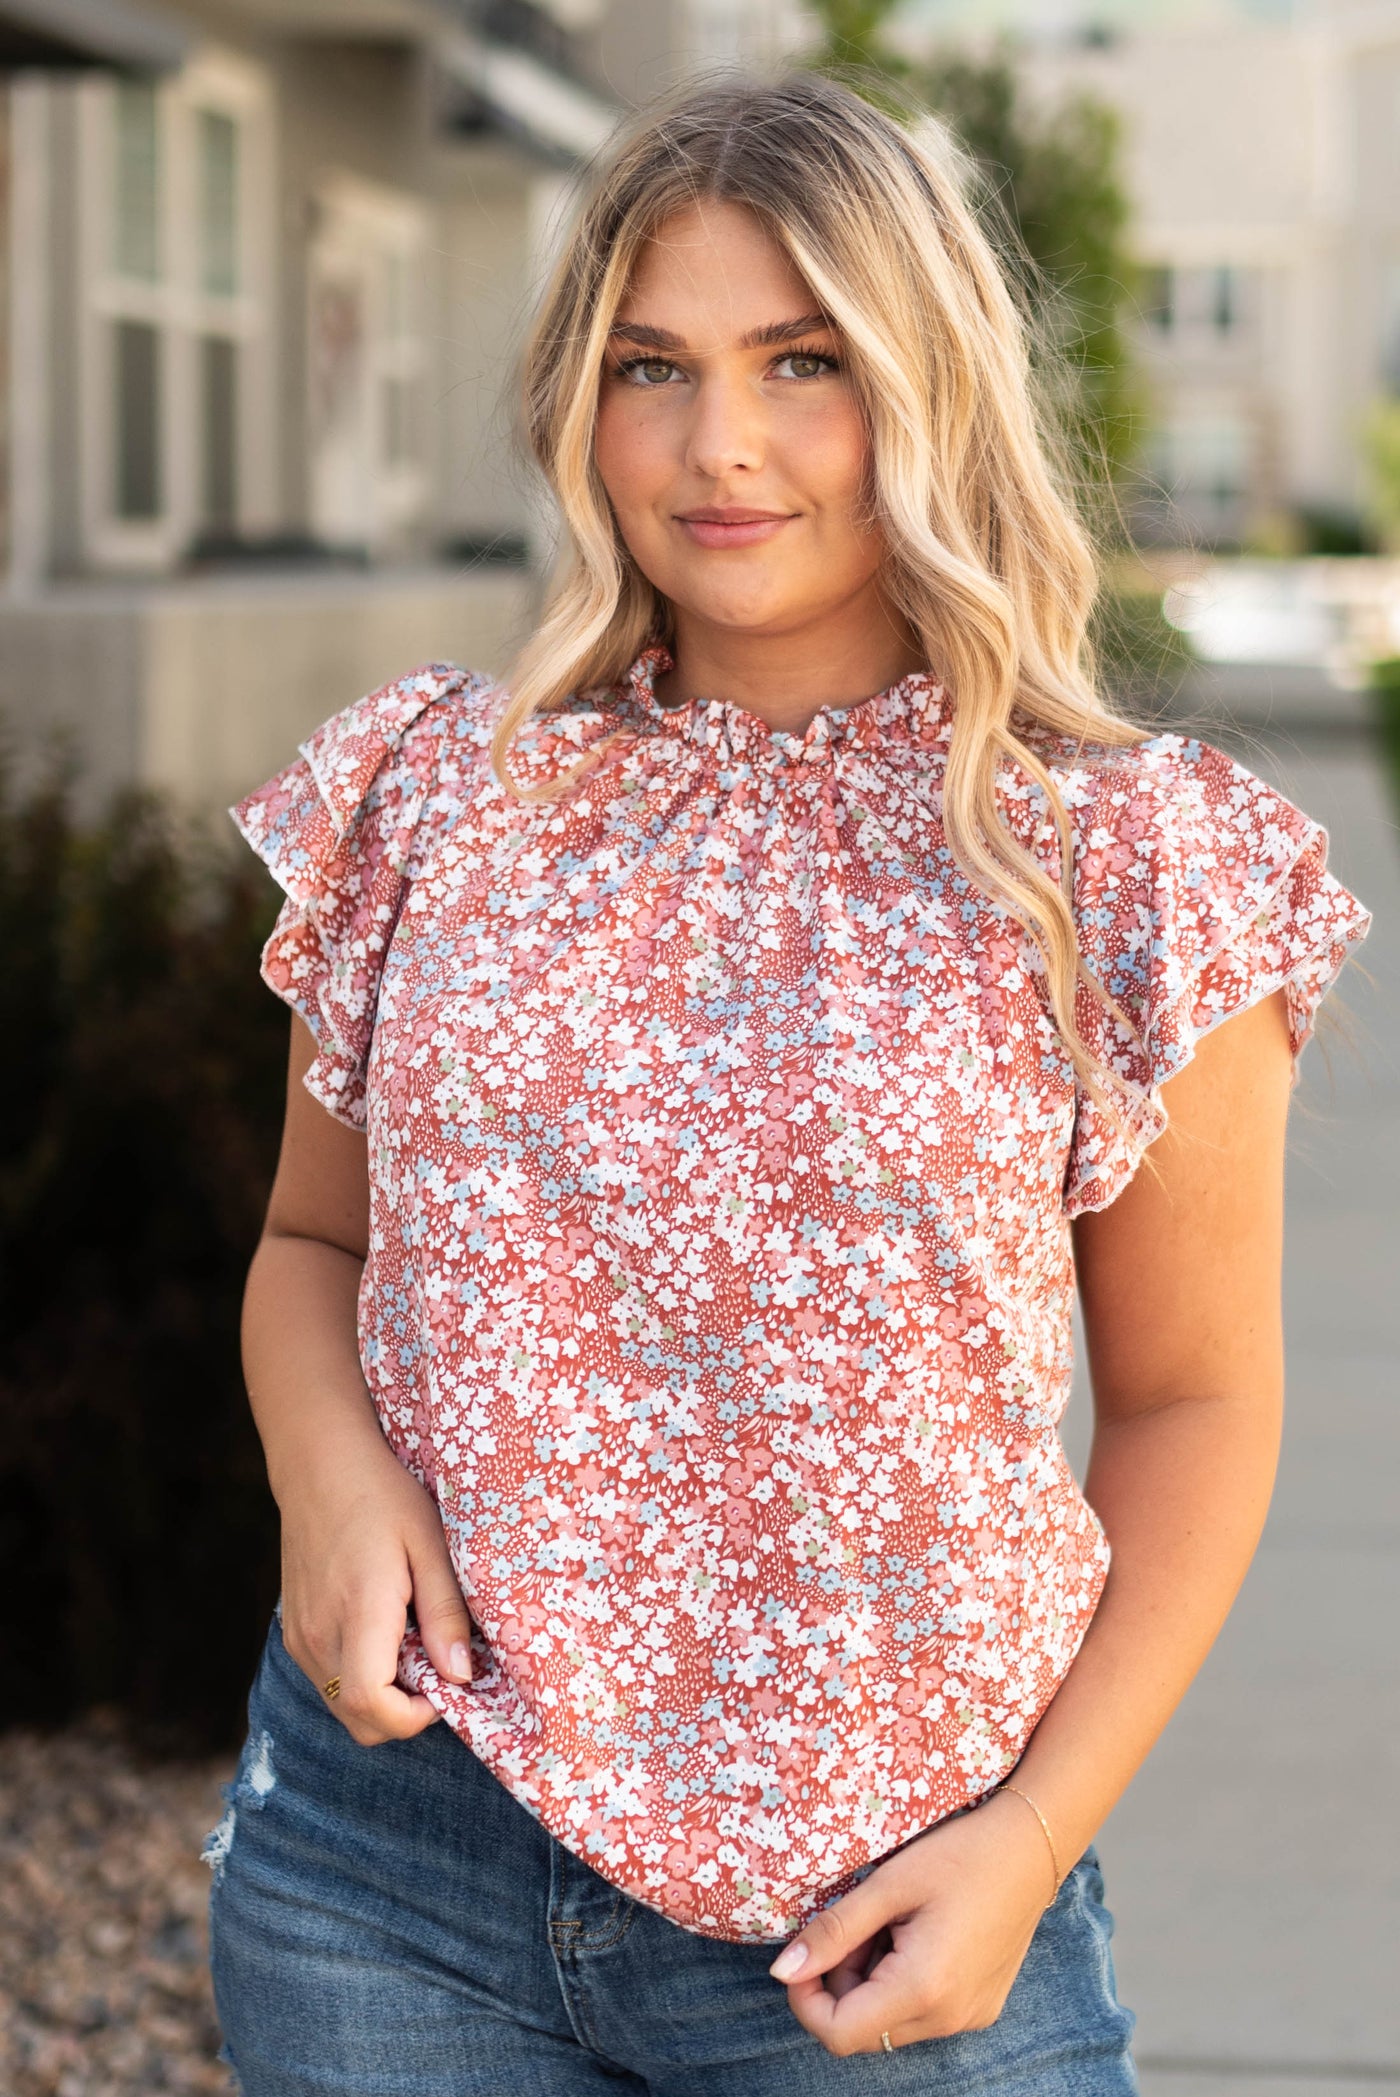 Brick floral top with ruffle sleeves